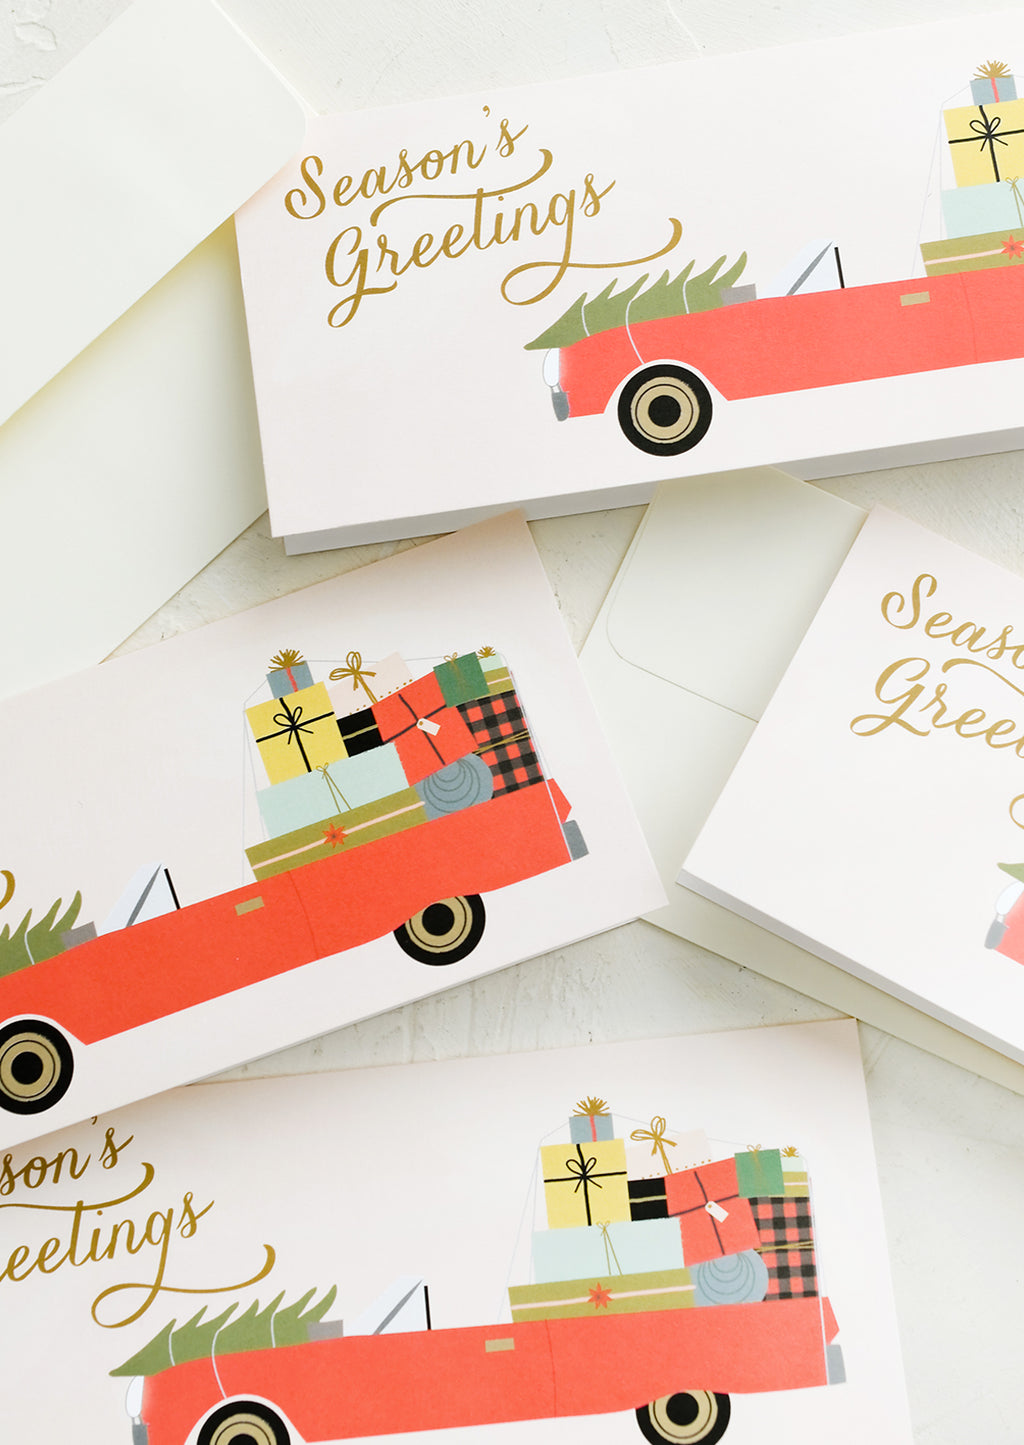 Boxed Set Of 8: Rectangular greeting cards with car full of presents, text reads "Season's greetings".